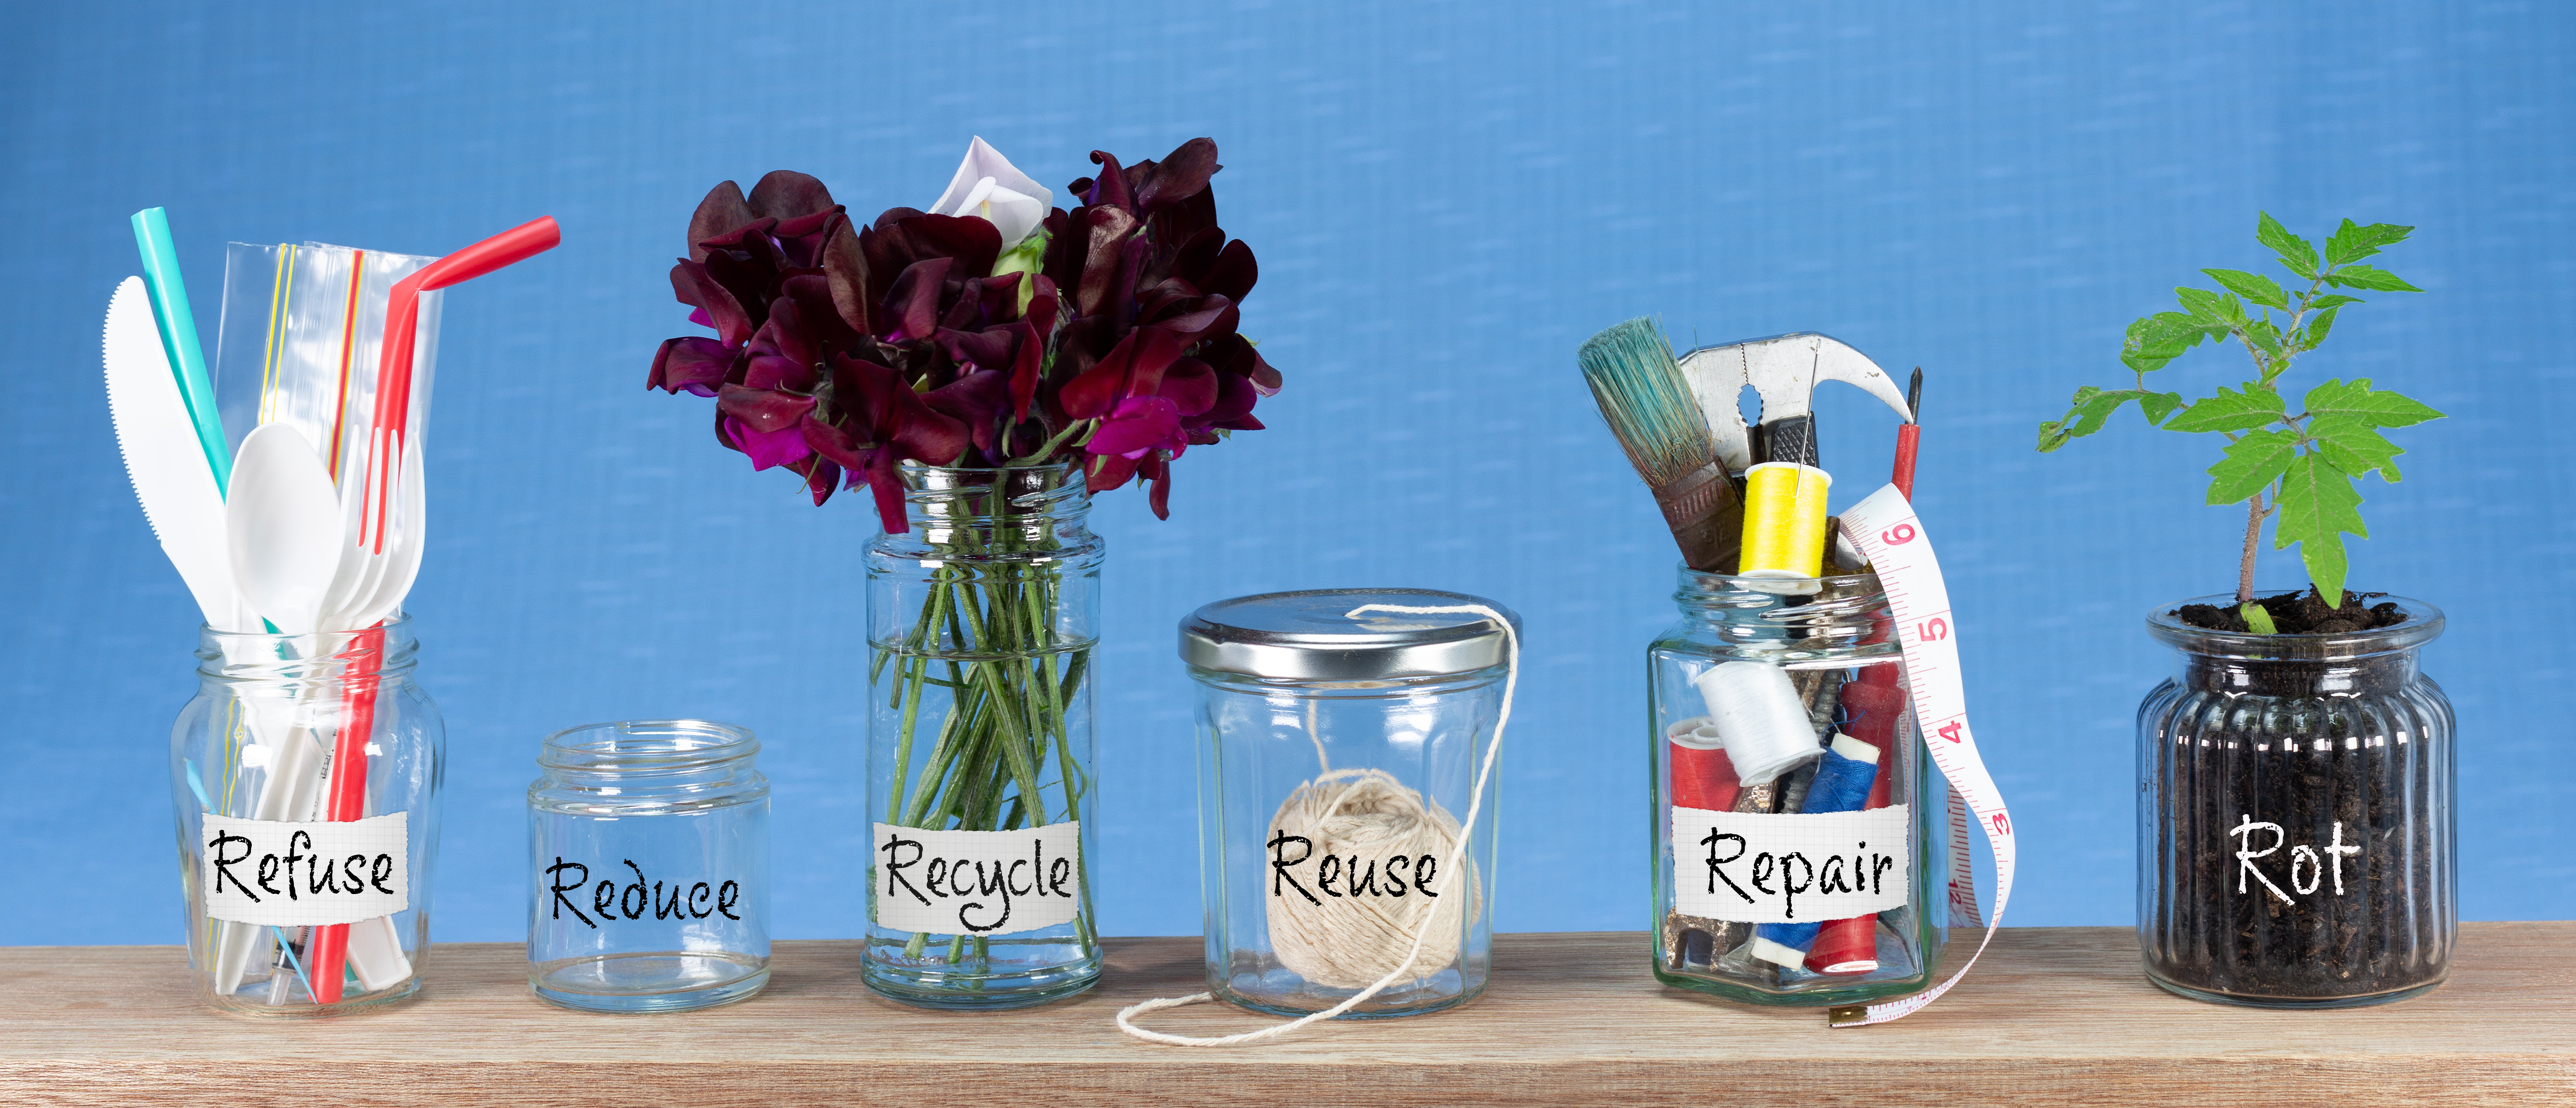 Jars to show recycling stages including Repair and Rot